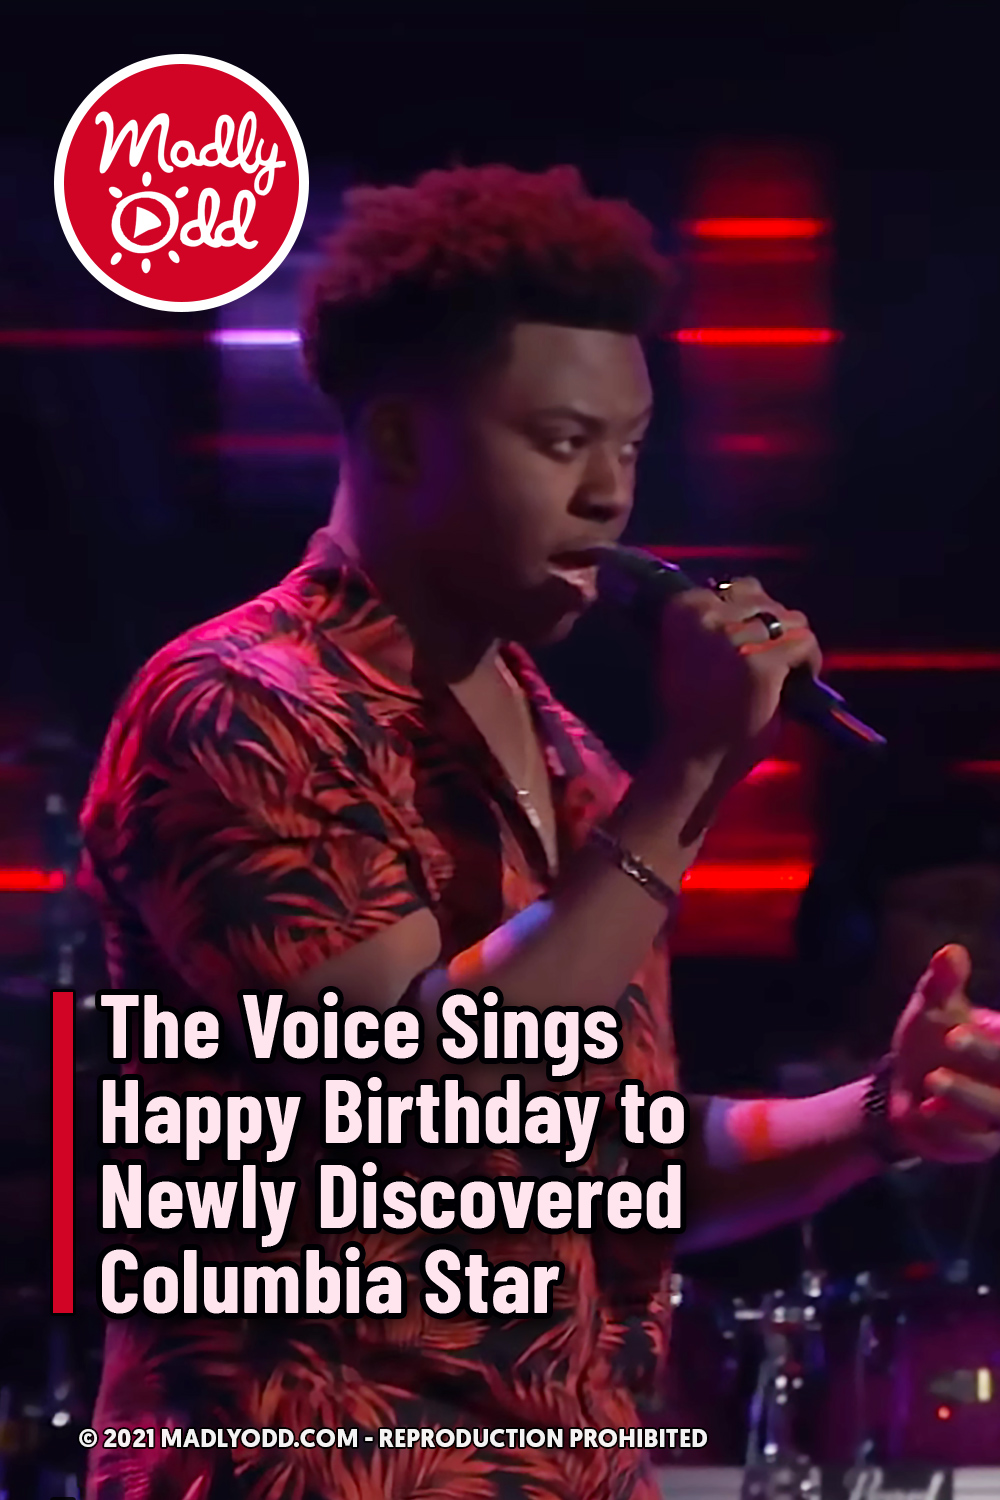 The Voice Sings Happy Birthday to Newly Discovered Columbia Star